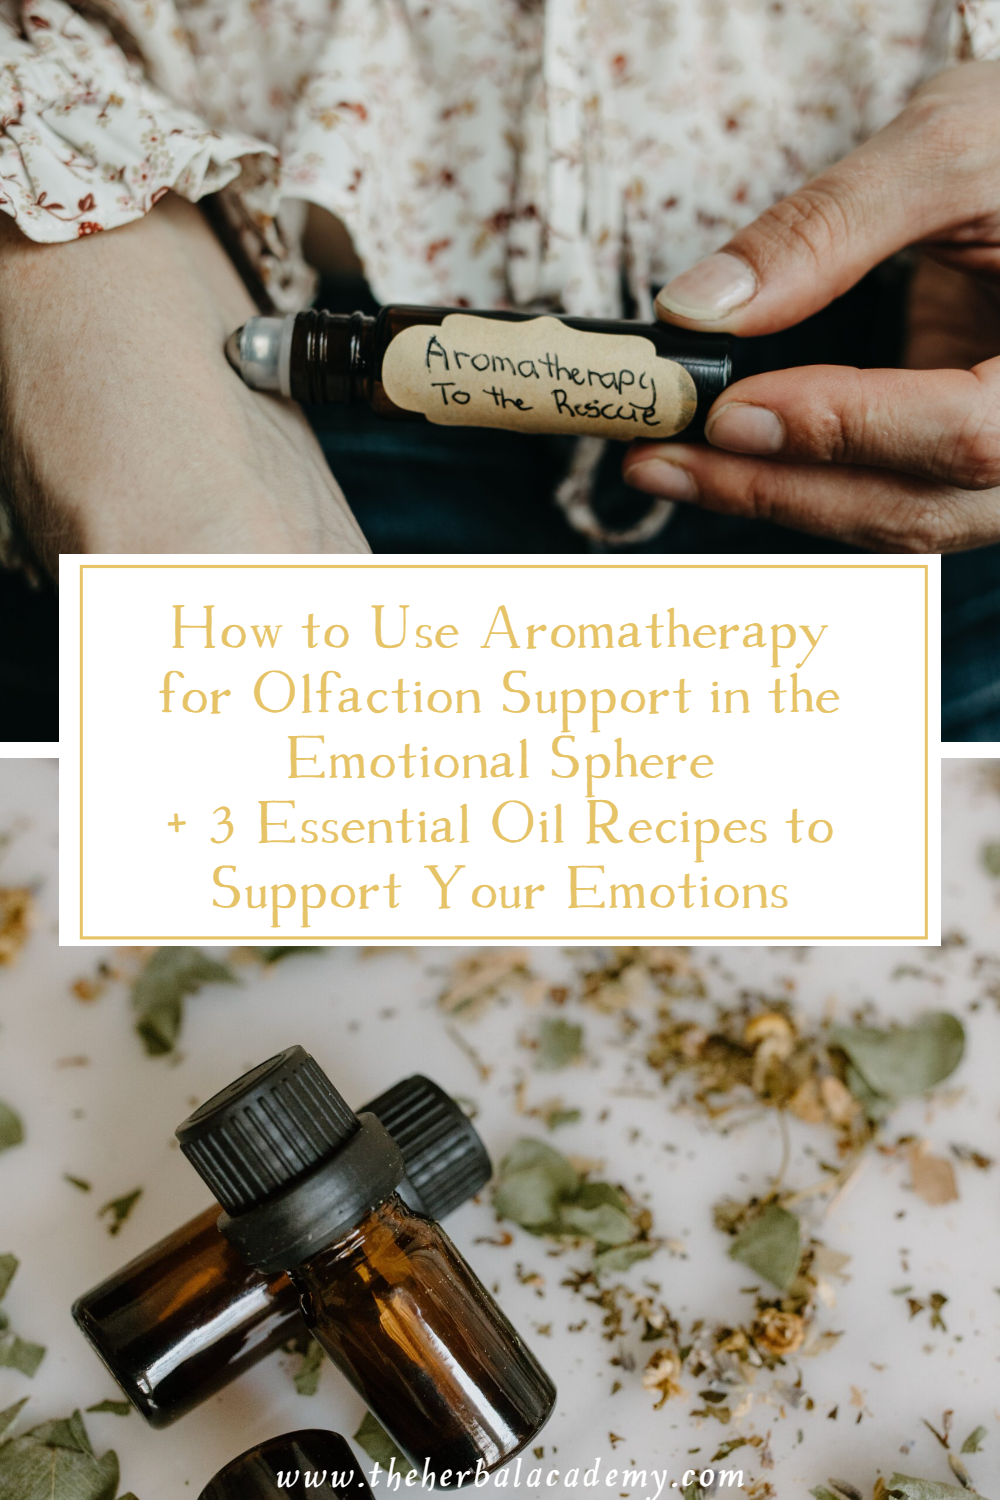 How to Use Aromatherapy for Olfaction Support in the Emotional Sphere + 3 Essential Oil Recipes to Support Your Emotions | Herbal Academy | Olfaction using essential oils can help us soothe our emotions to maximize our quality of life and meet our personal wellness goals.